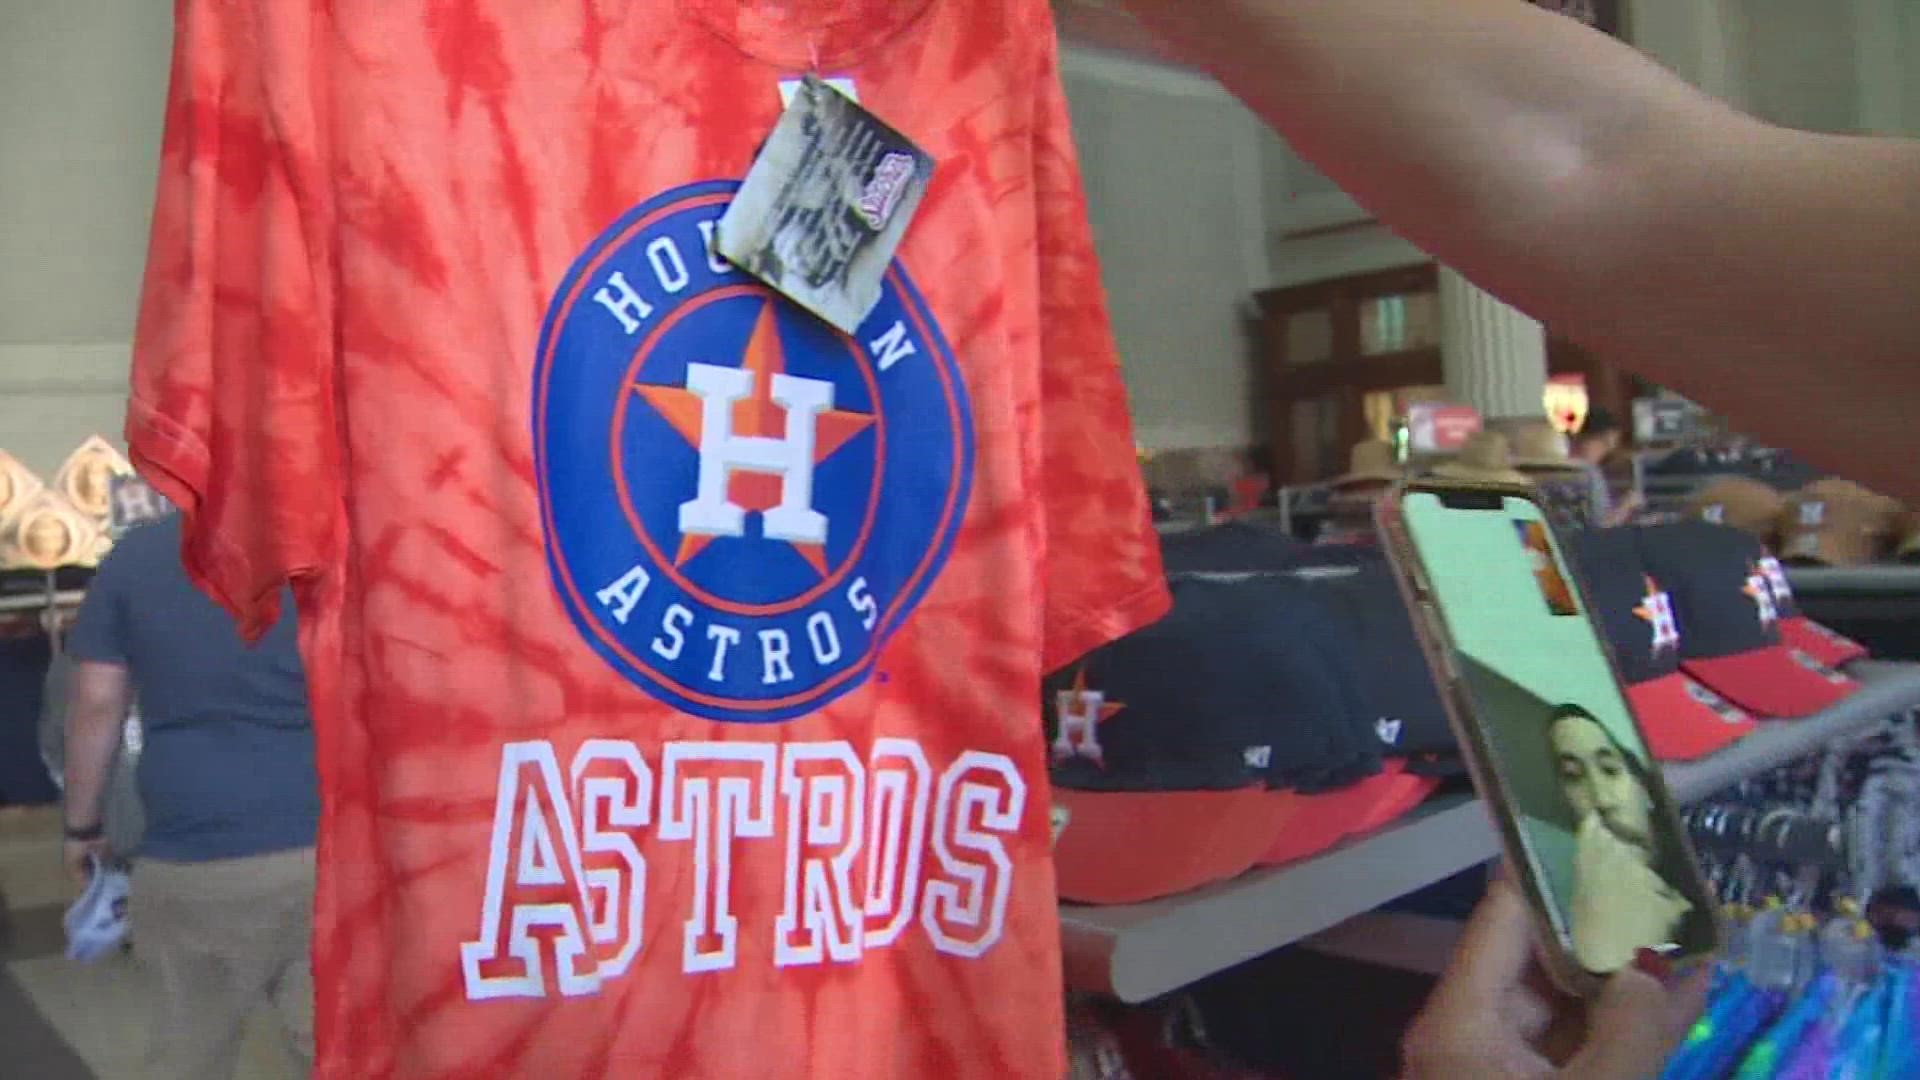 Houston is ready to cheer on its Astros, buying new merch like shirts, caps and other swag ahead of tonight's American League playoff match against the Red Sox.